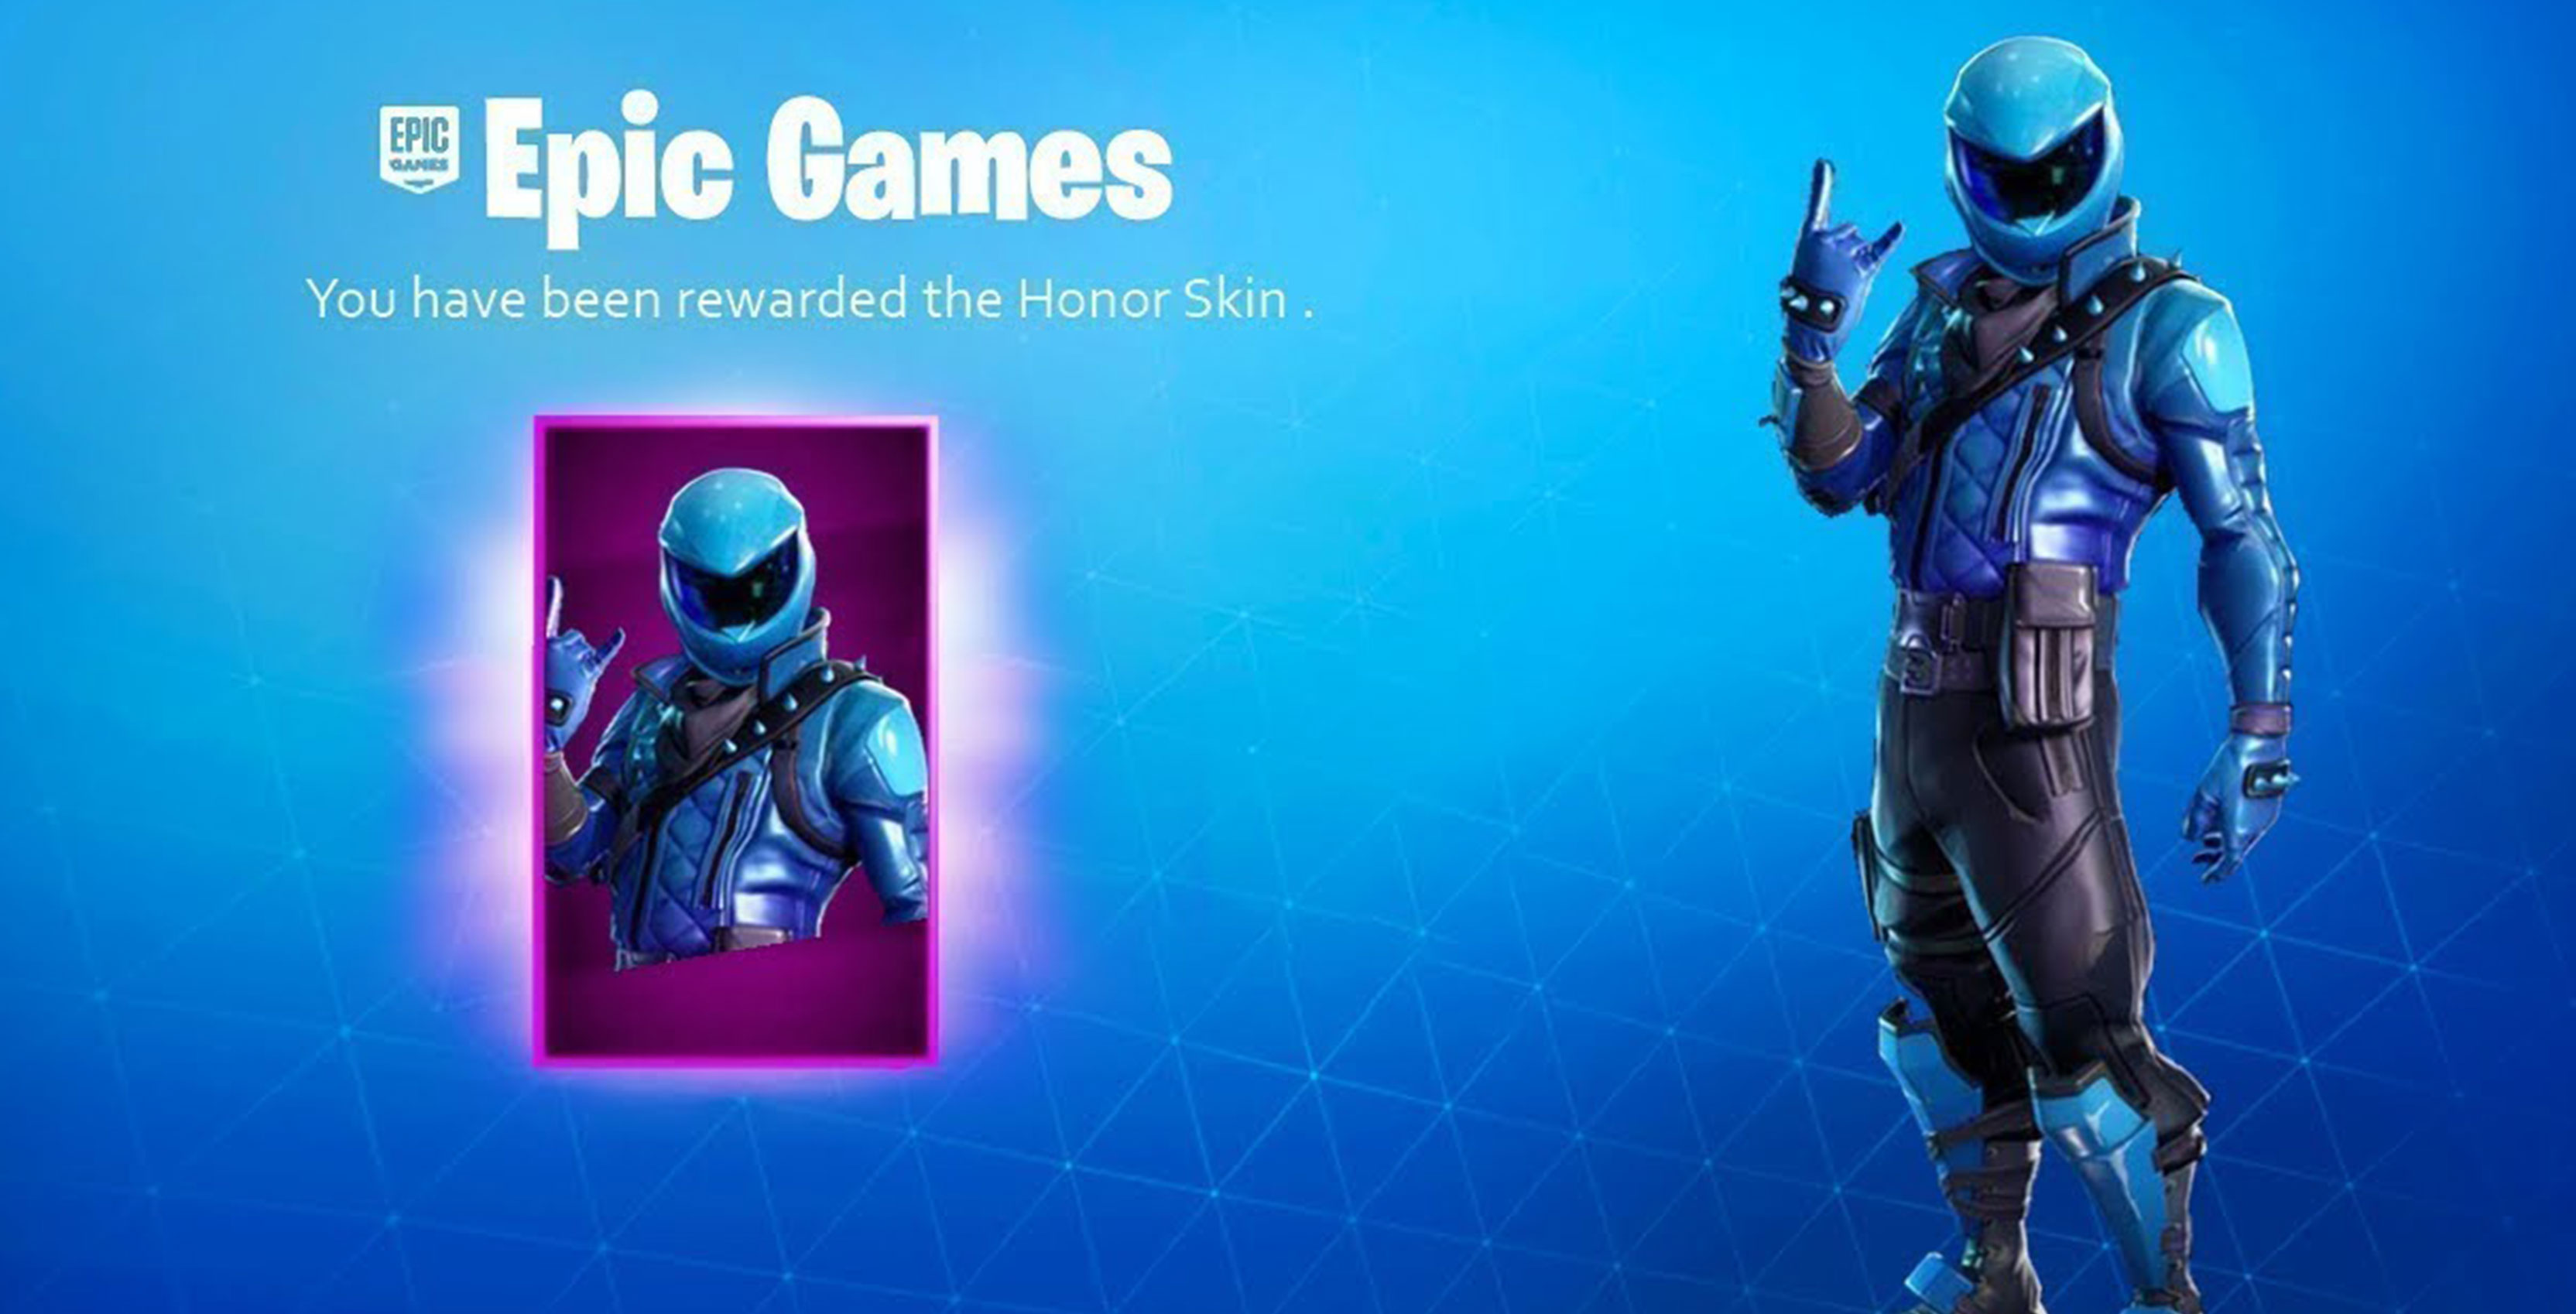 up the mantle with a new phone called the honor view 20 which it s using to kick off the launch of its first custom fortnite skin the honor guard - what are going to be the new skins in fortnite